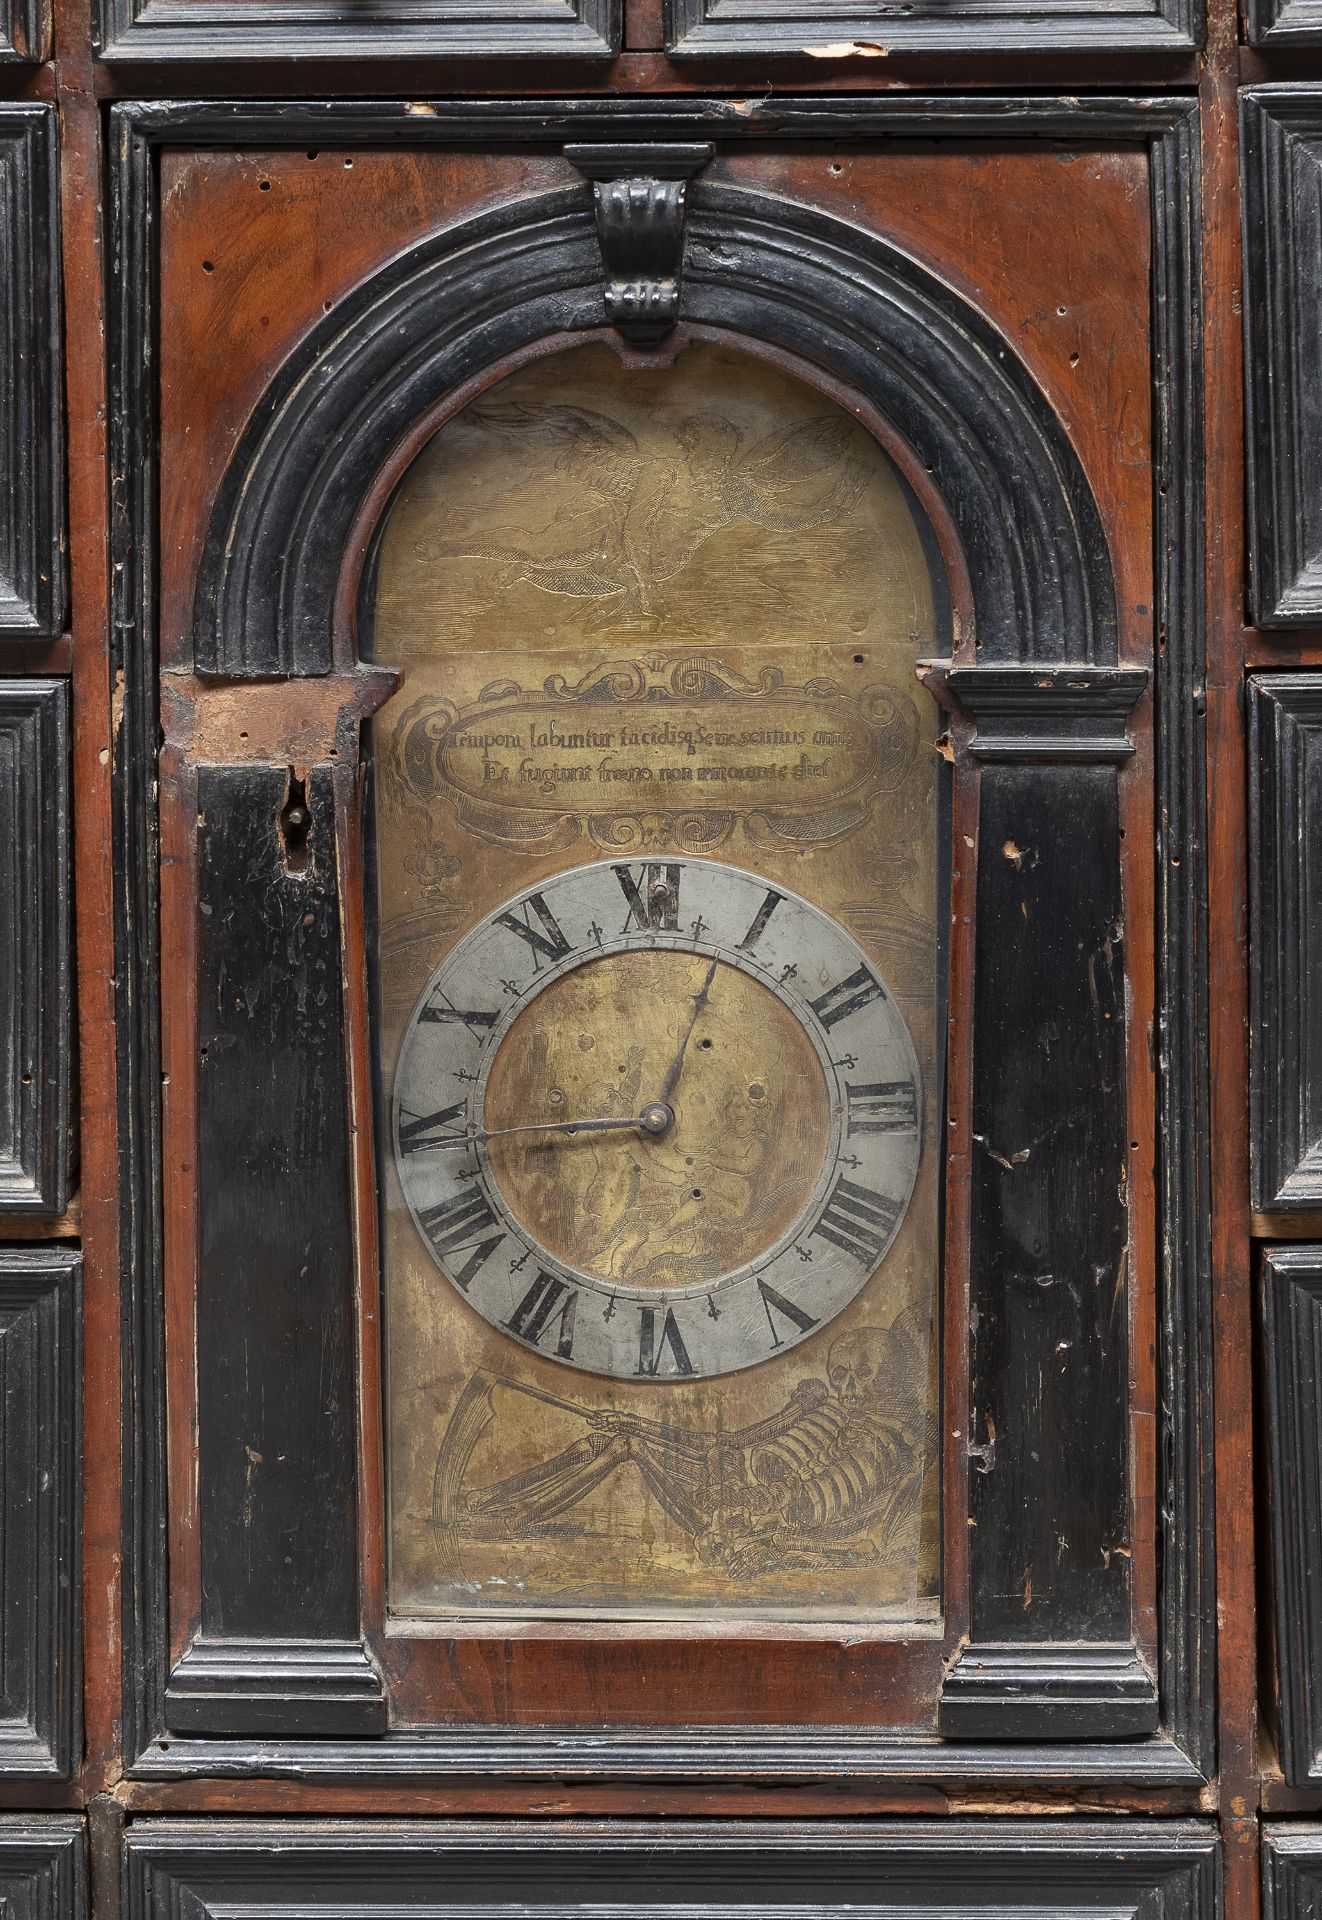 RARE WALNUT COIN CABINET WITH CLOCK PROBABLY 18TH CENTURY ROME - Image 3 of 3